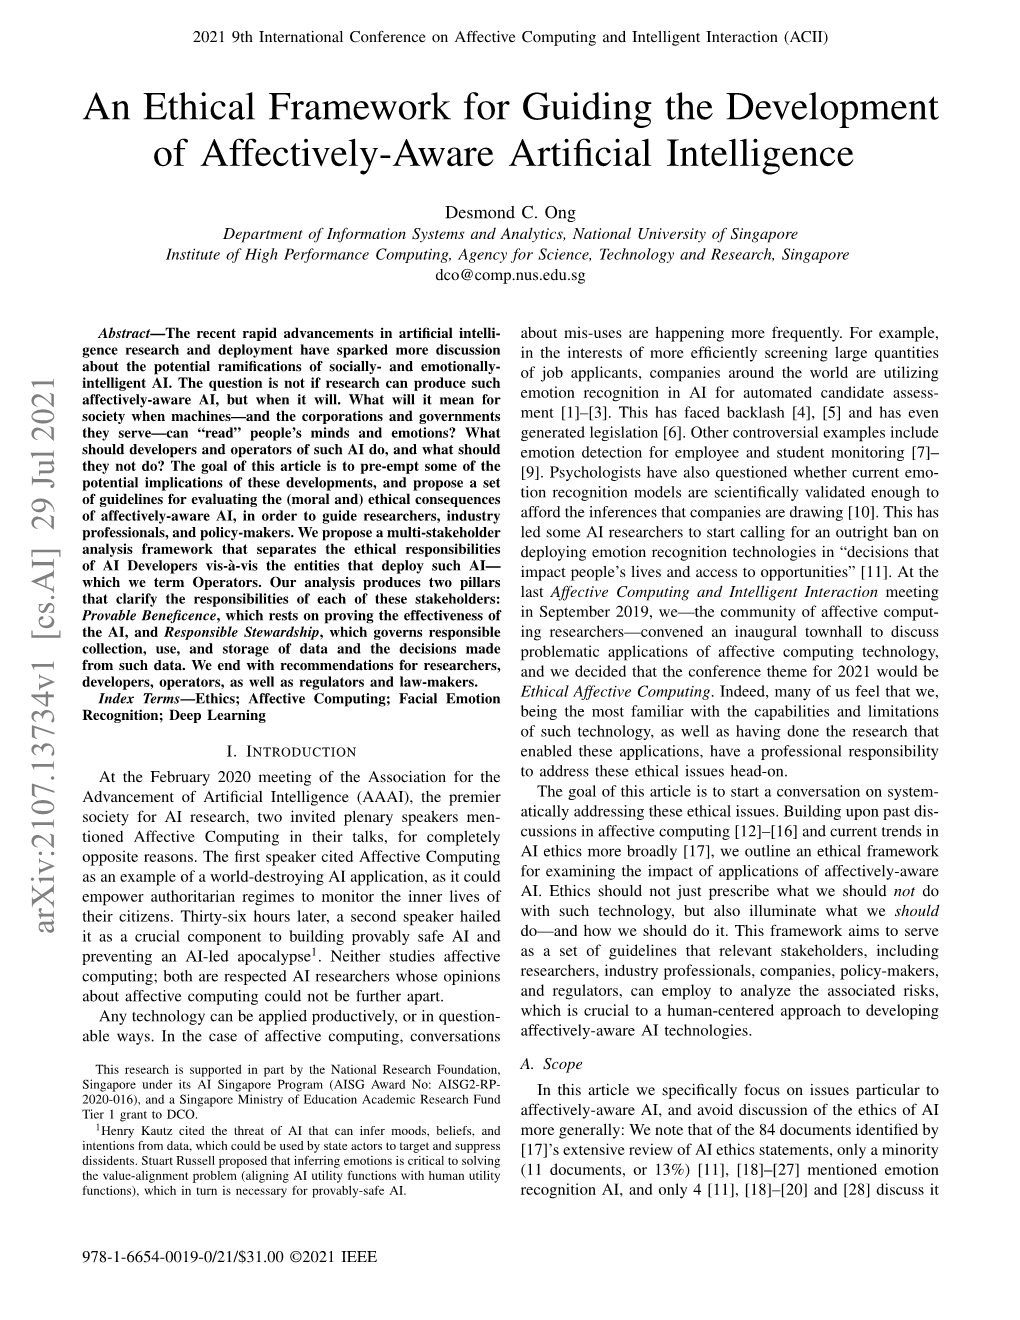 An Ethical Framework for Guiding the Development of Affectively-Aware Artificial Intelligence